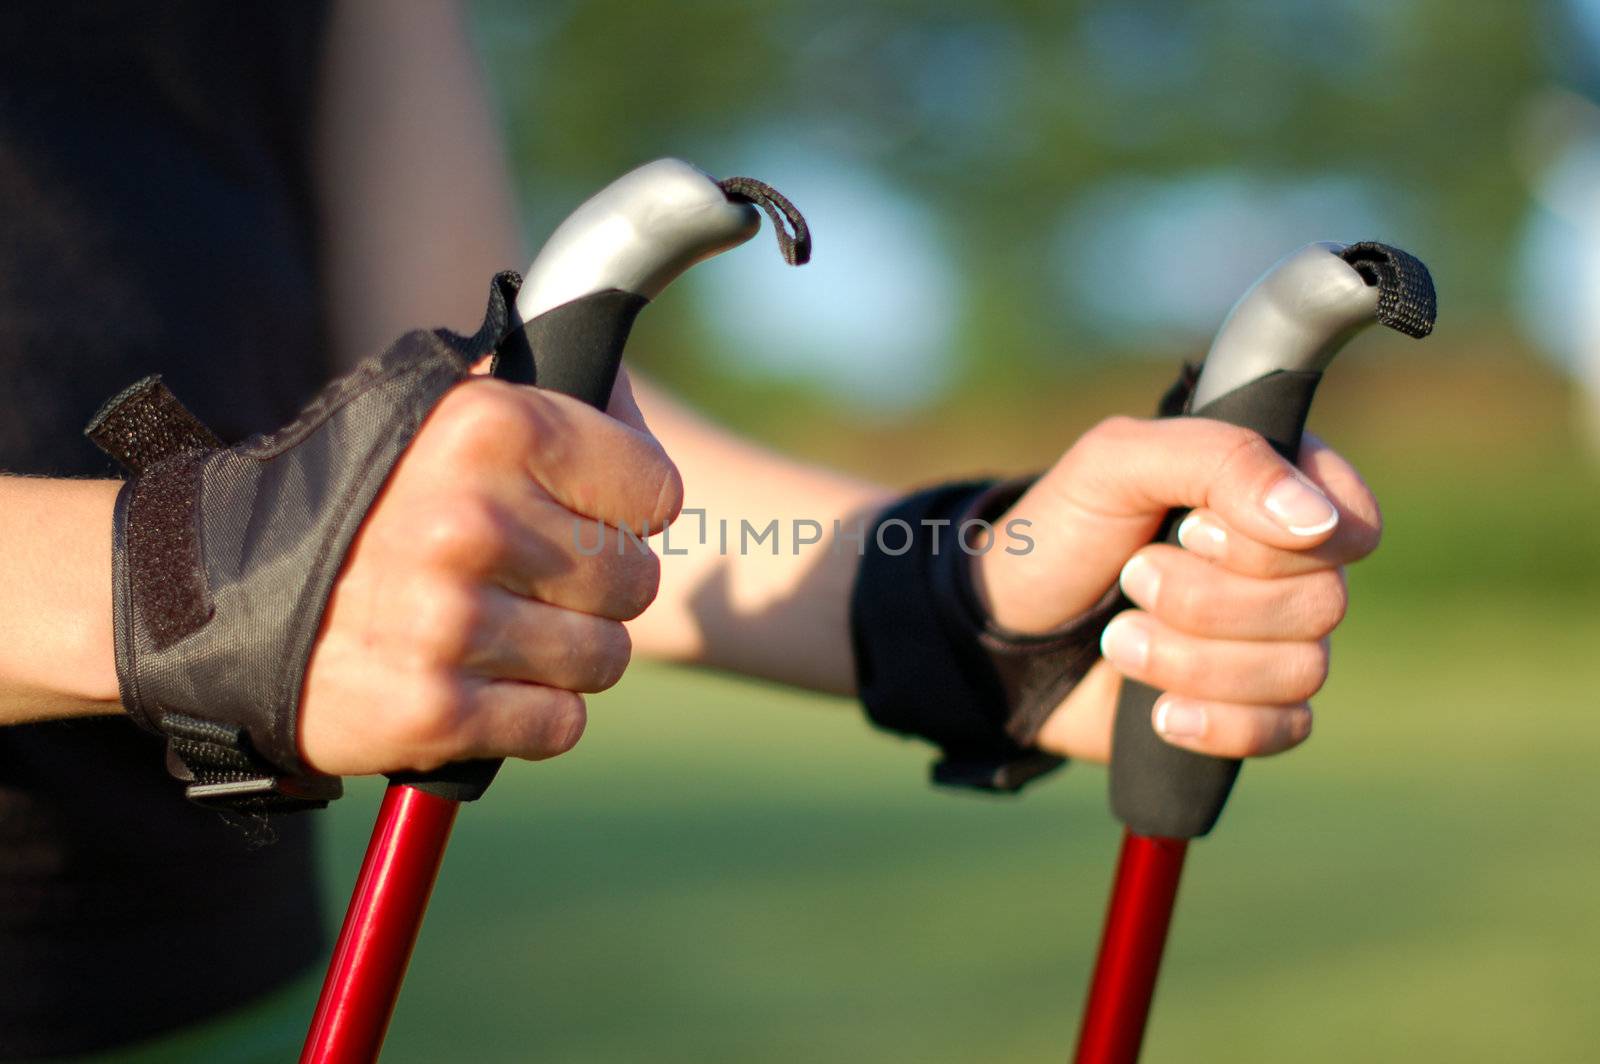 Closeup of woman's hands holding nordic walking poles